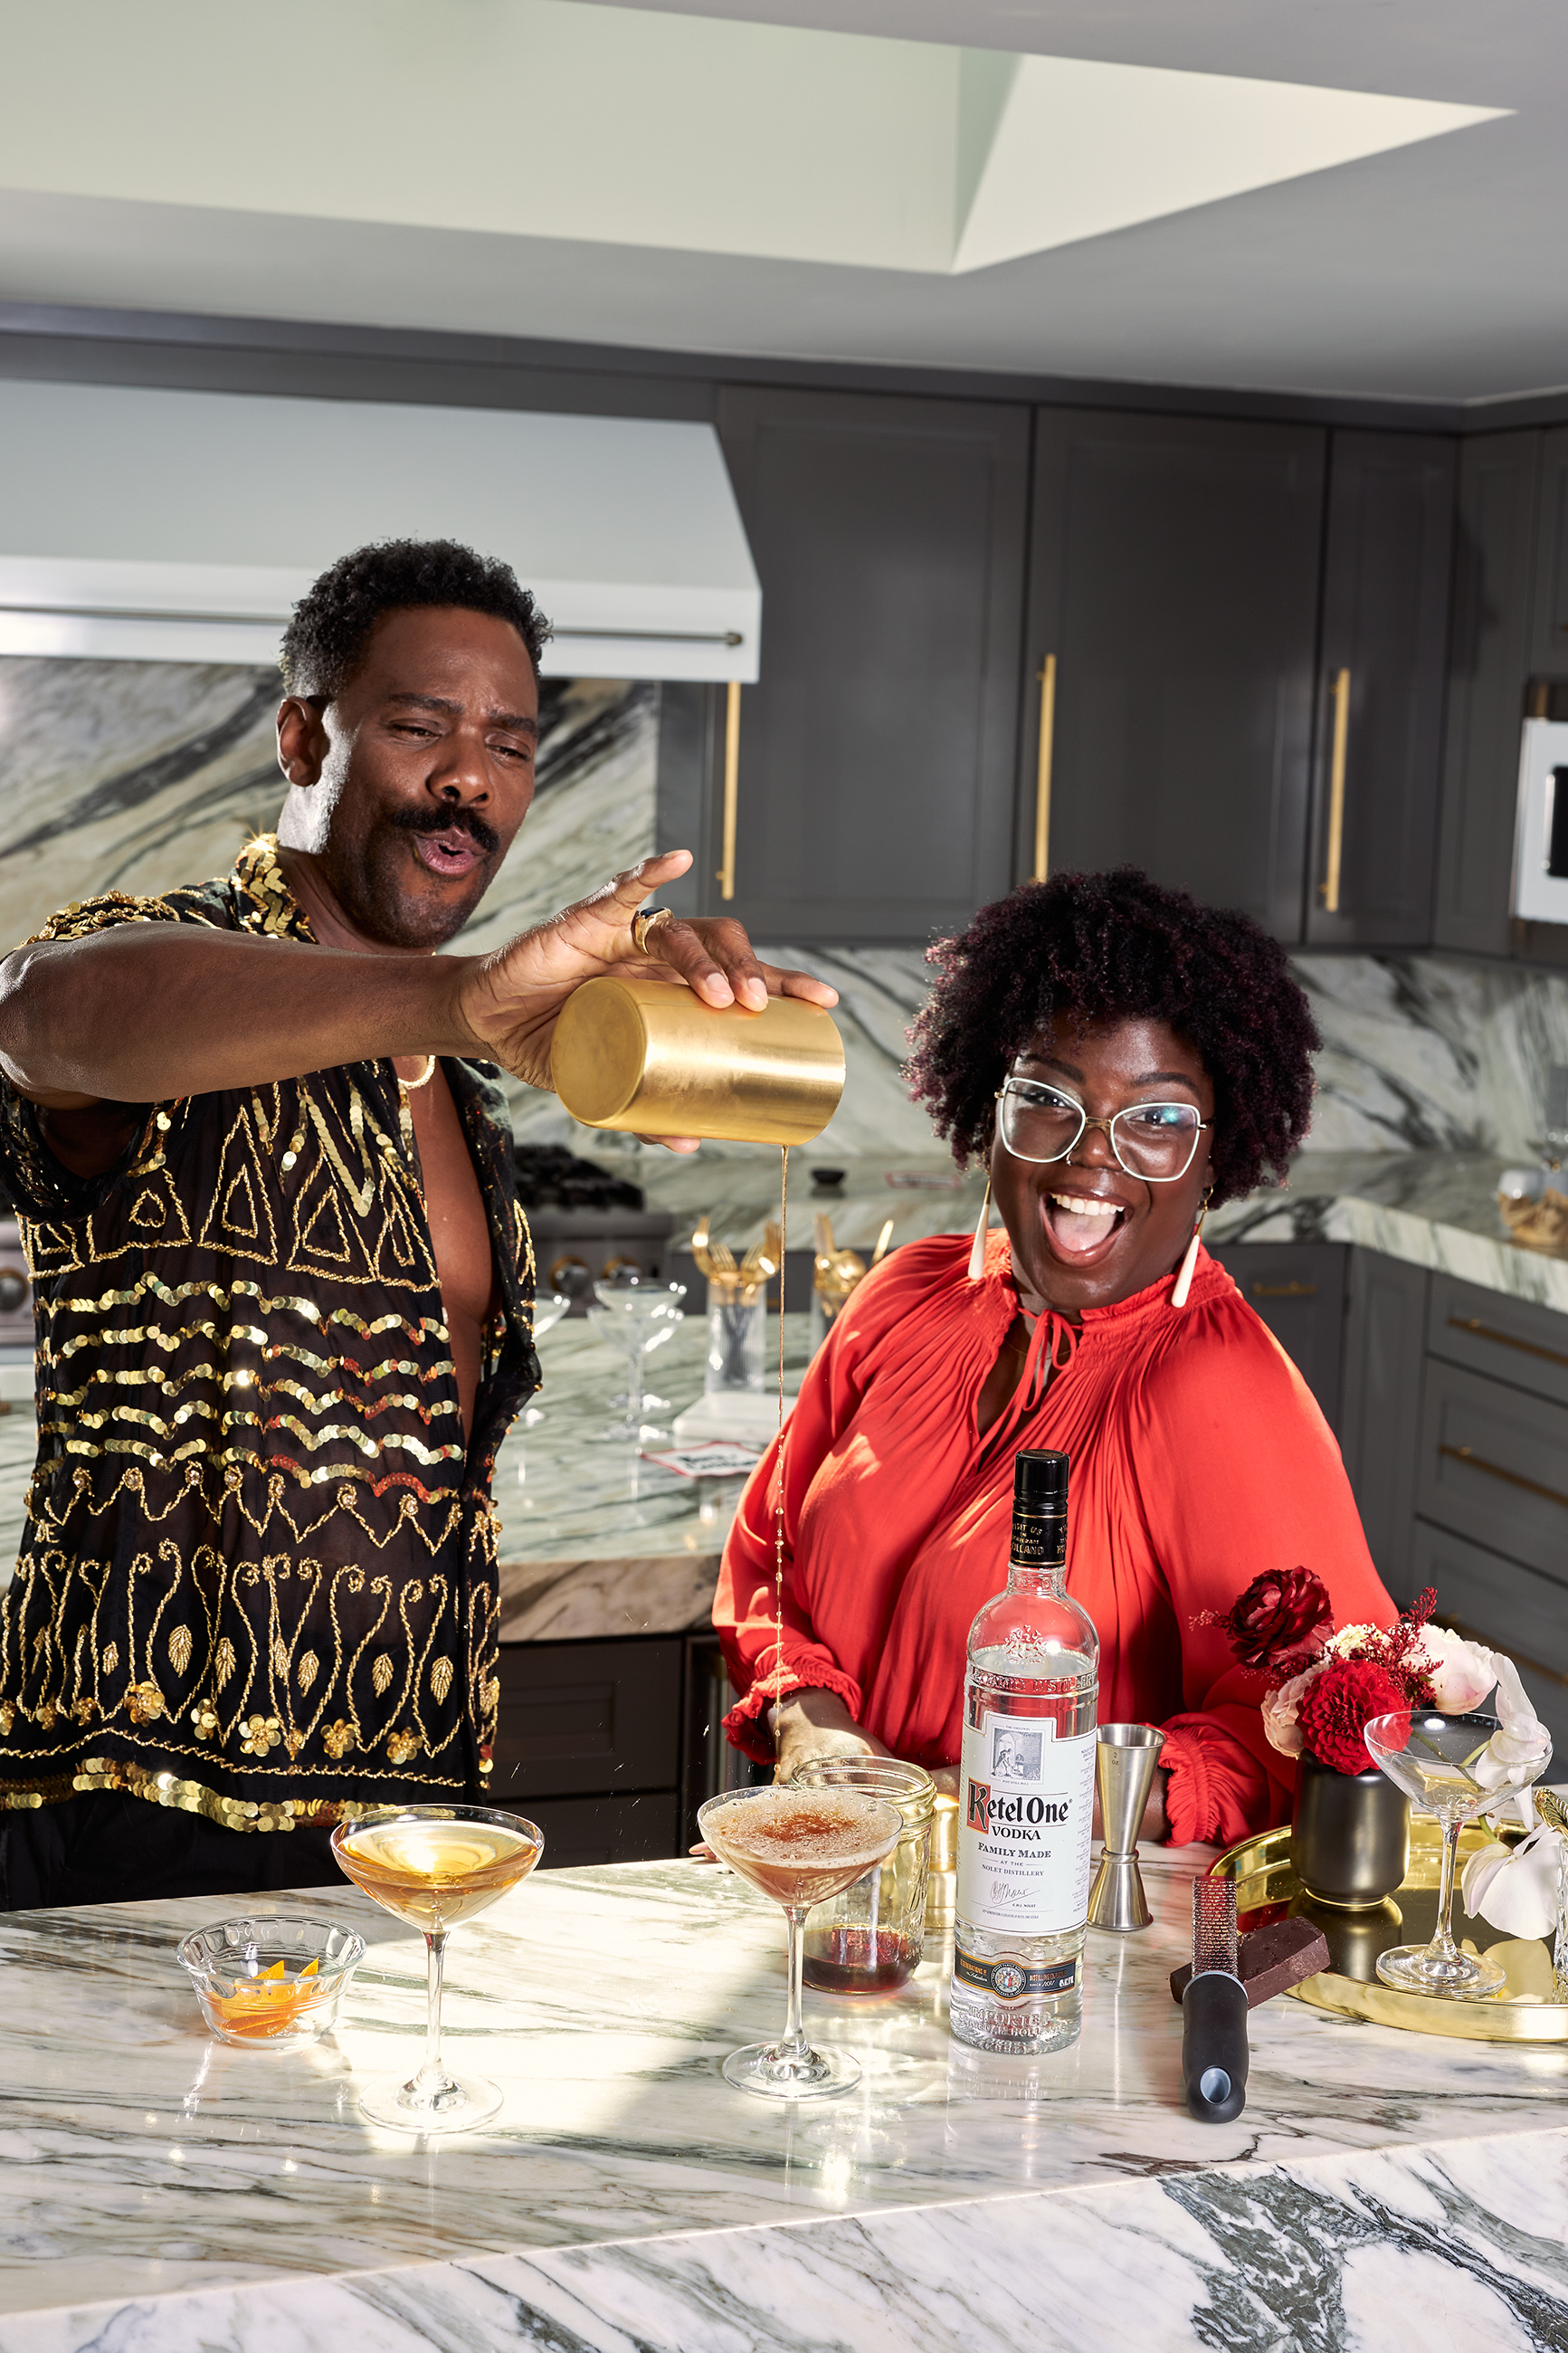 Colman Domingo and Lauren Paylor recreate Emmys cocktail magic at home for viewers across the country this Awards Season